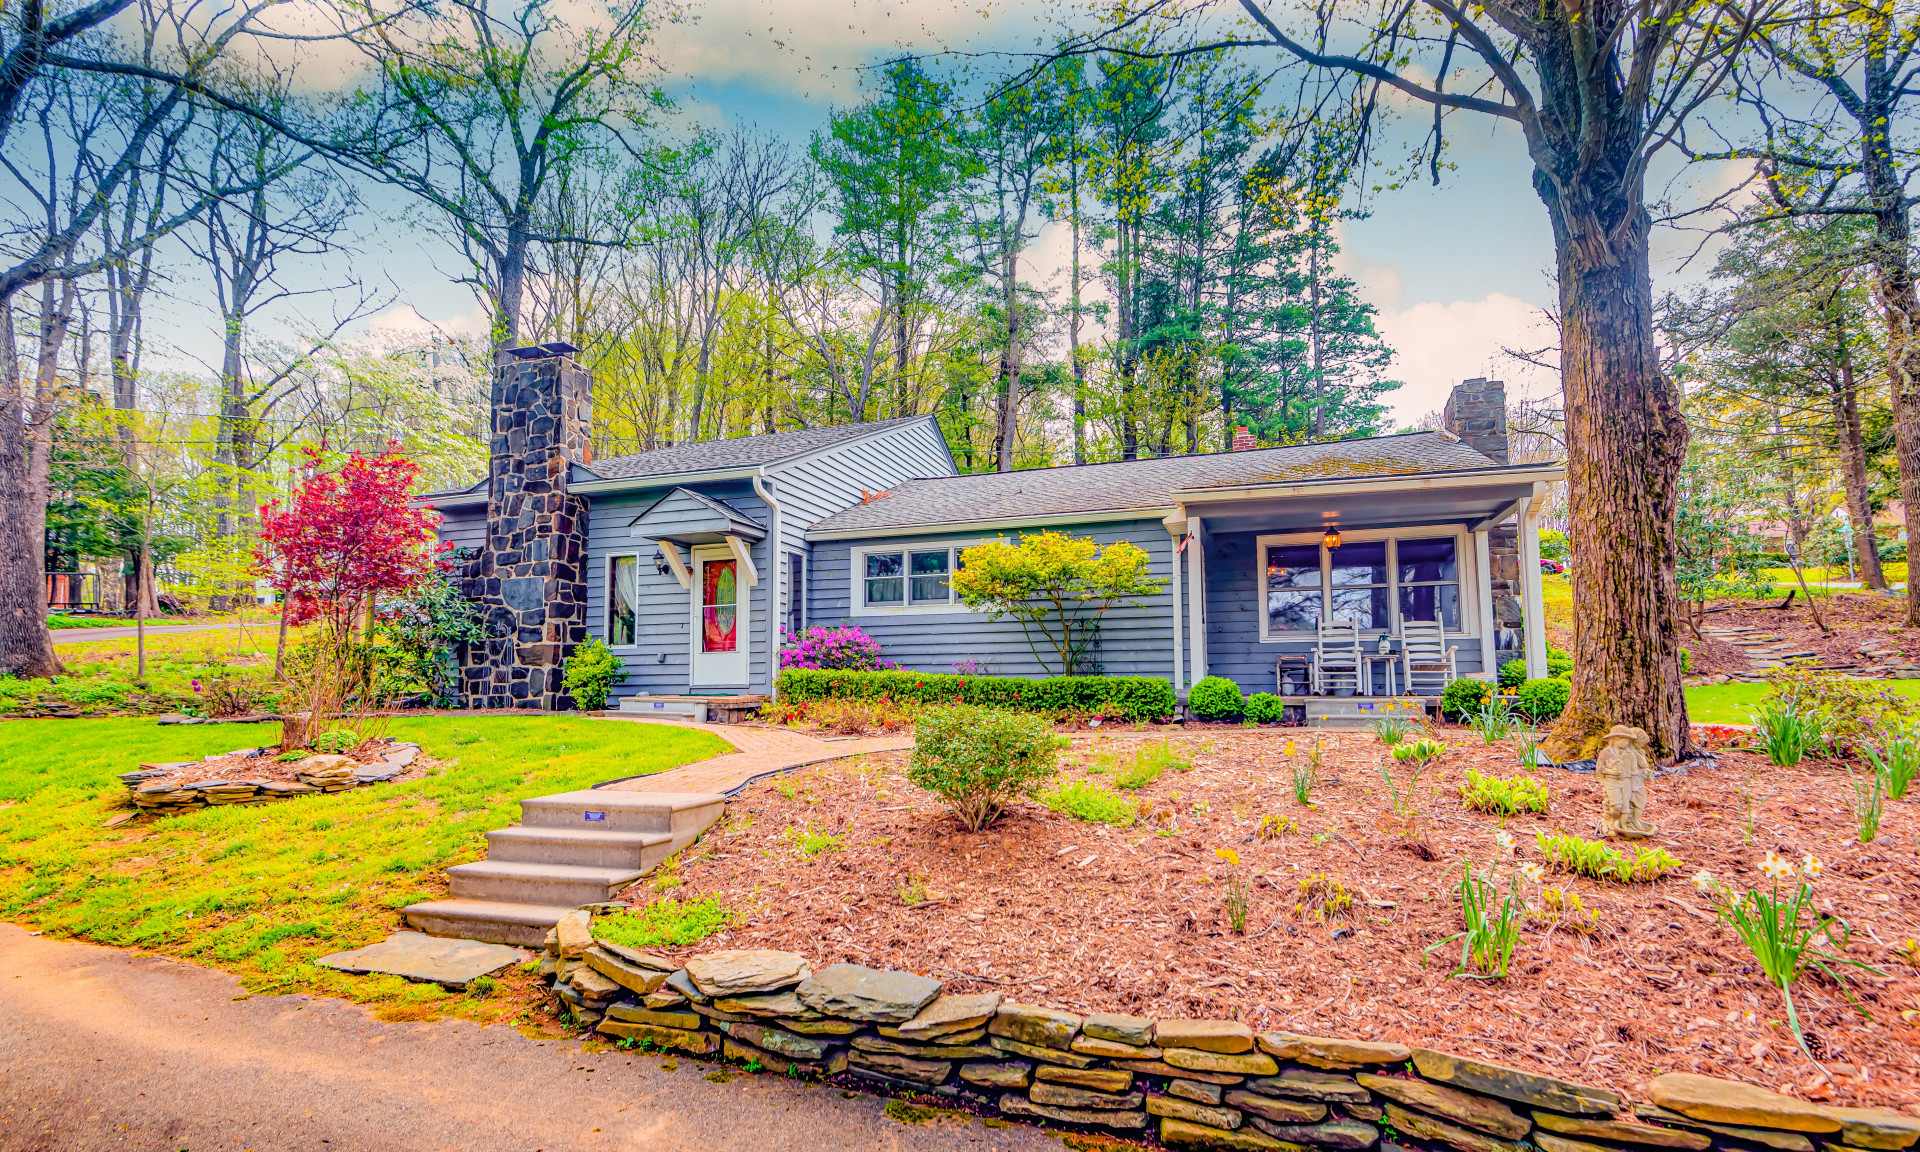 Enjoy Country charm with this sweet mountain cottage located within walking distance to downtown Jefferson.